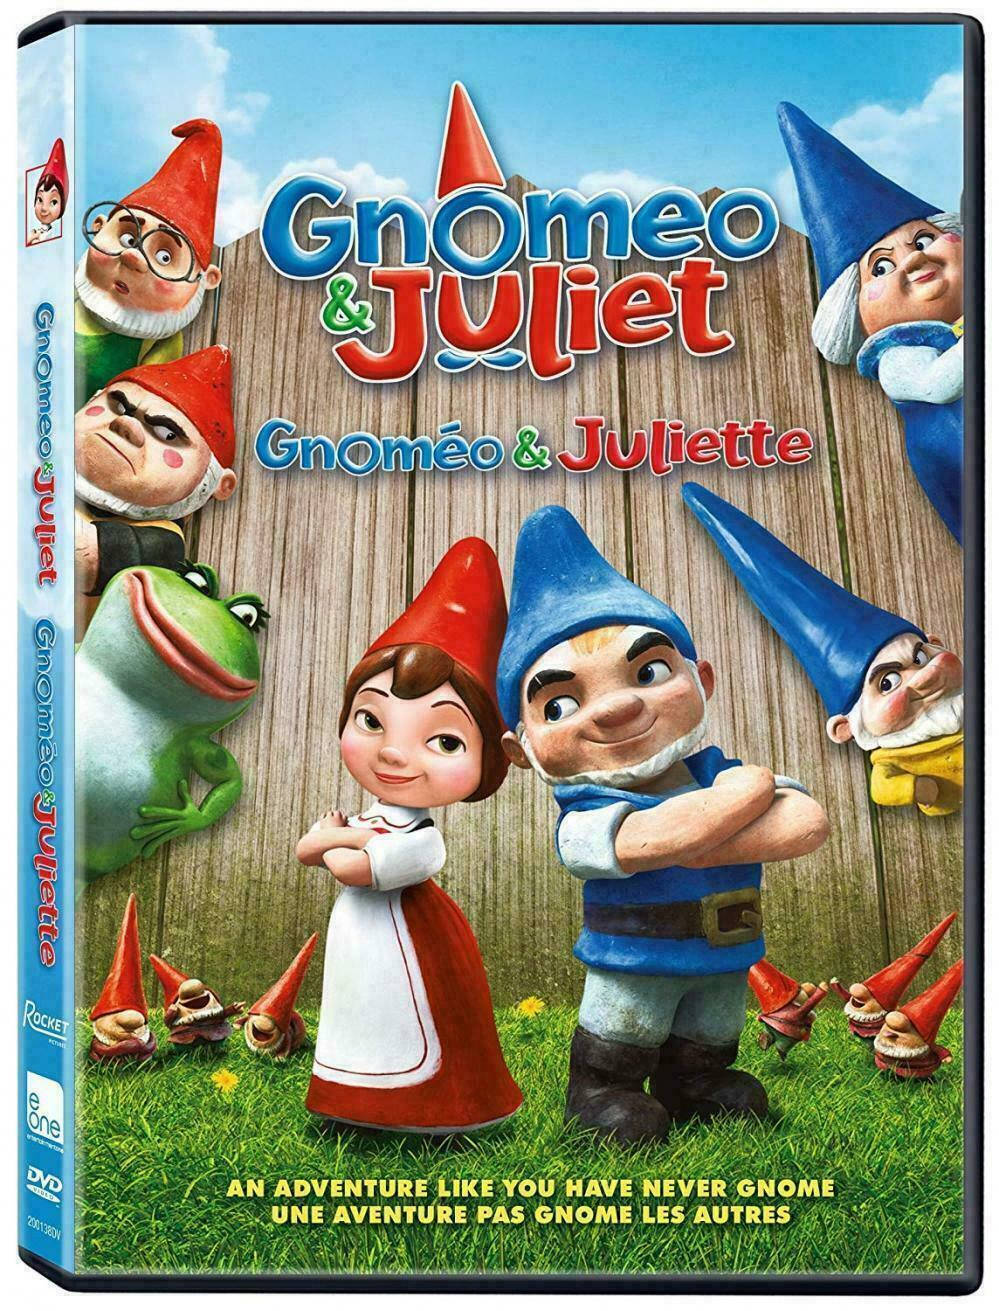 Gnomeo And Juliet DVD Movie Poster Wallpaper